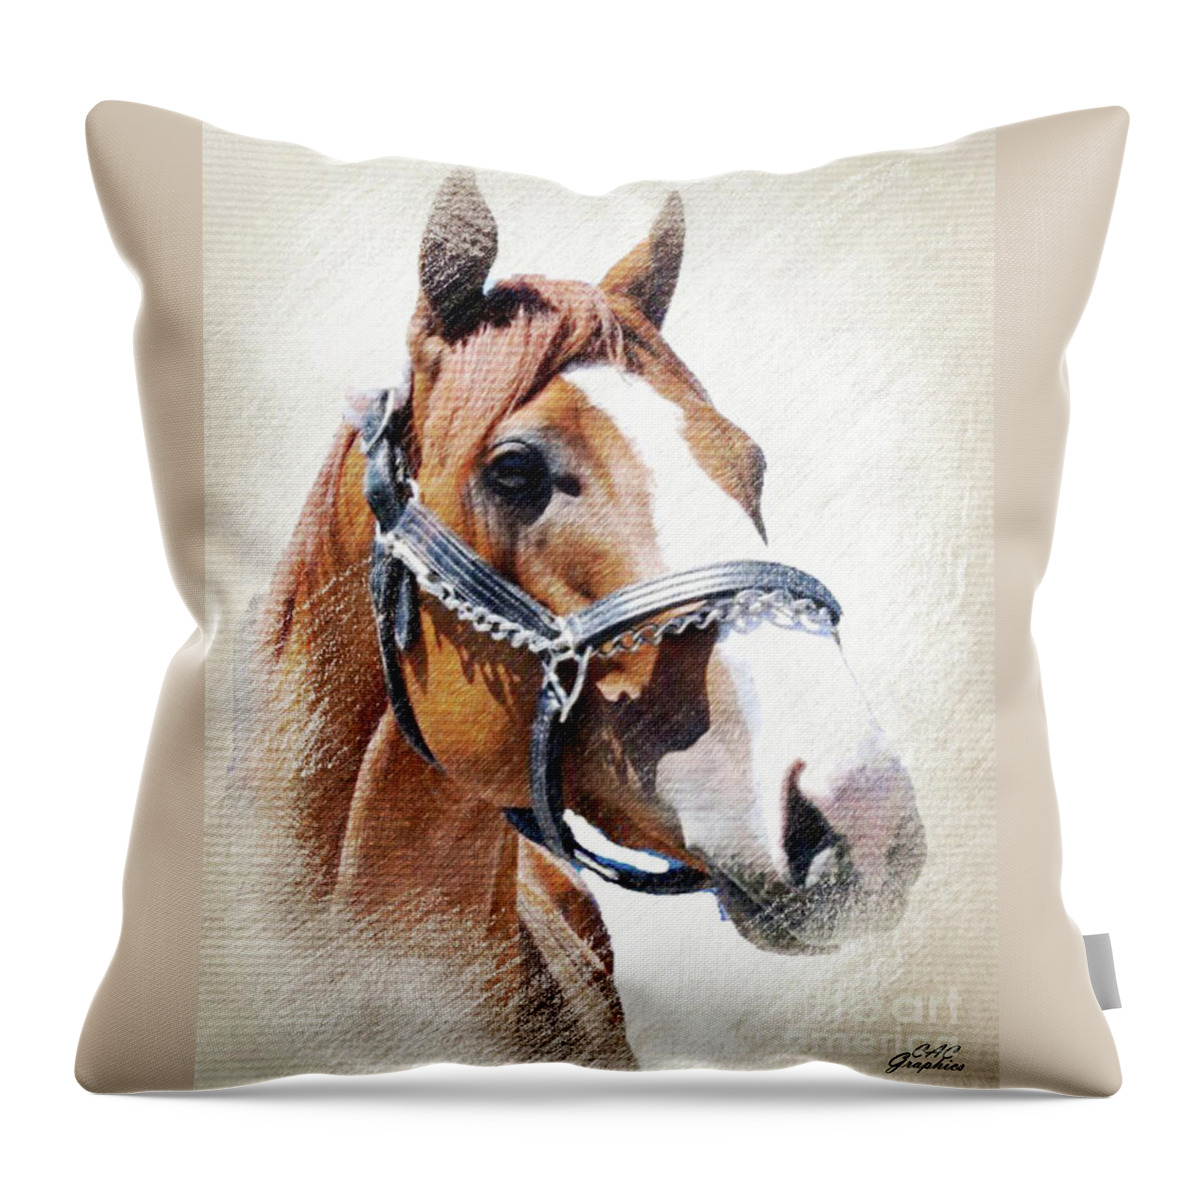 Justify Throw Pillow featuring the digital art Justify by CAC Graphics